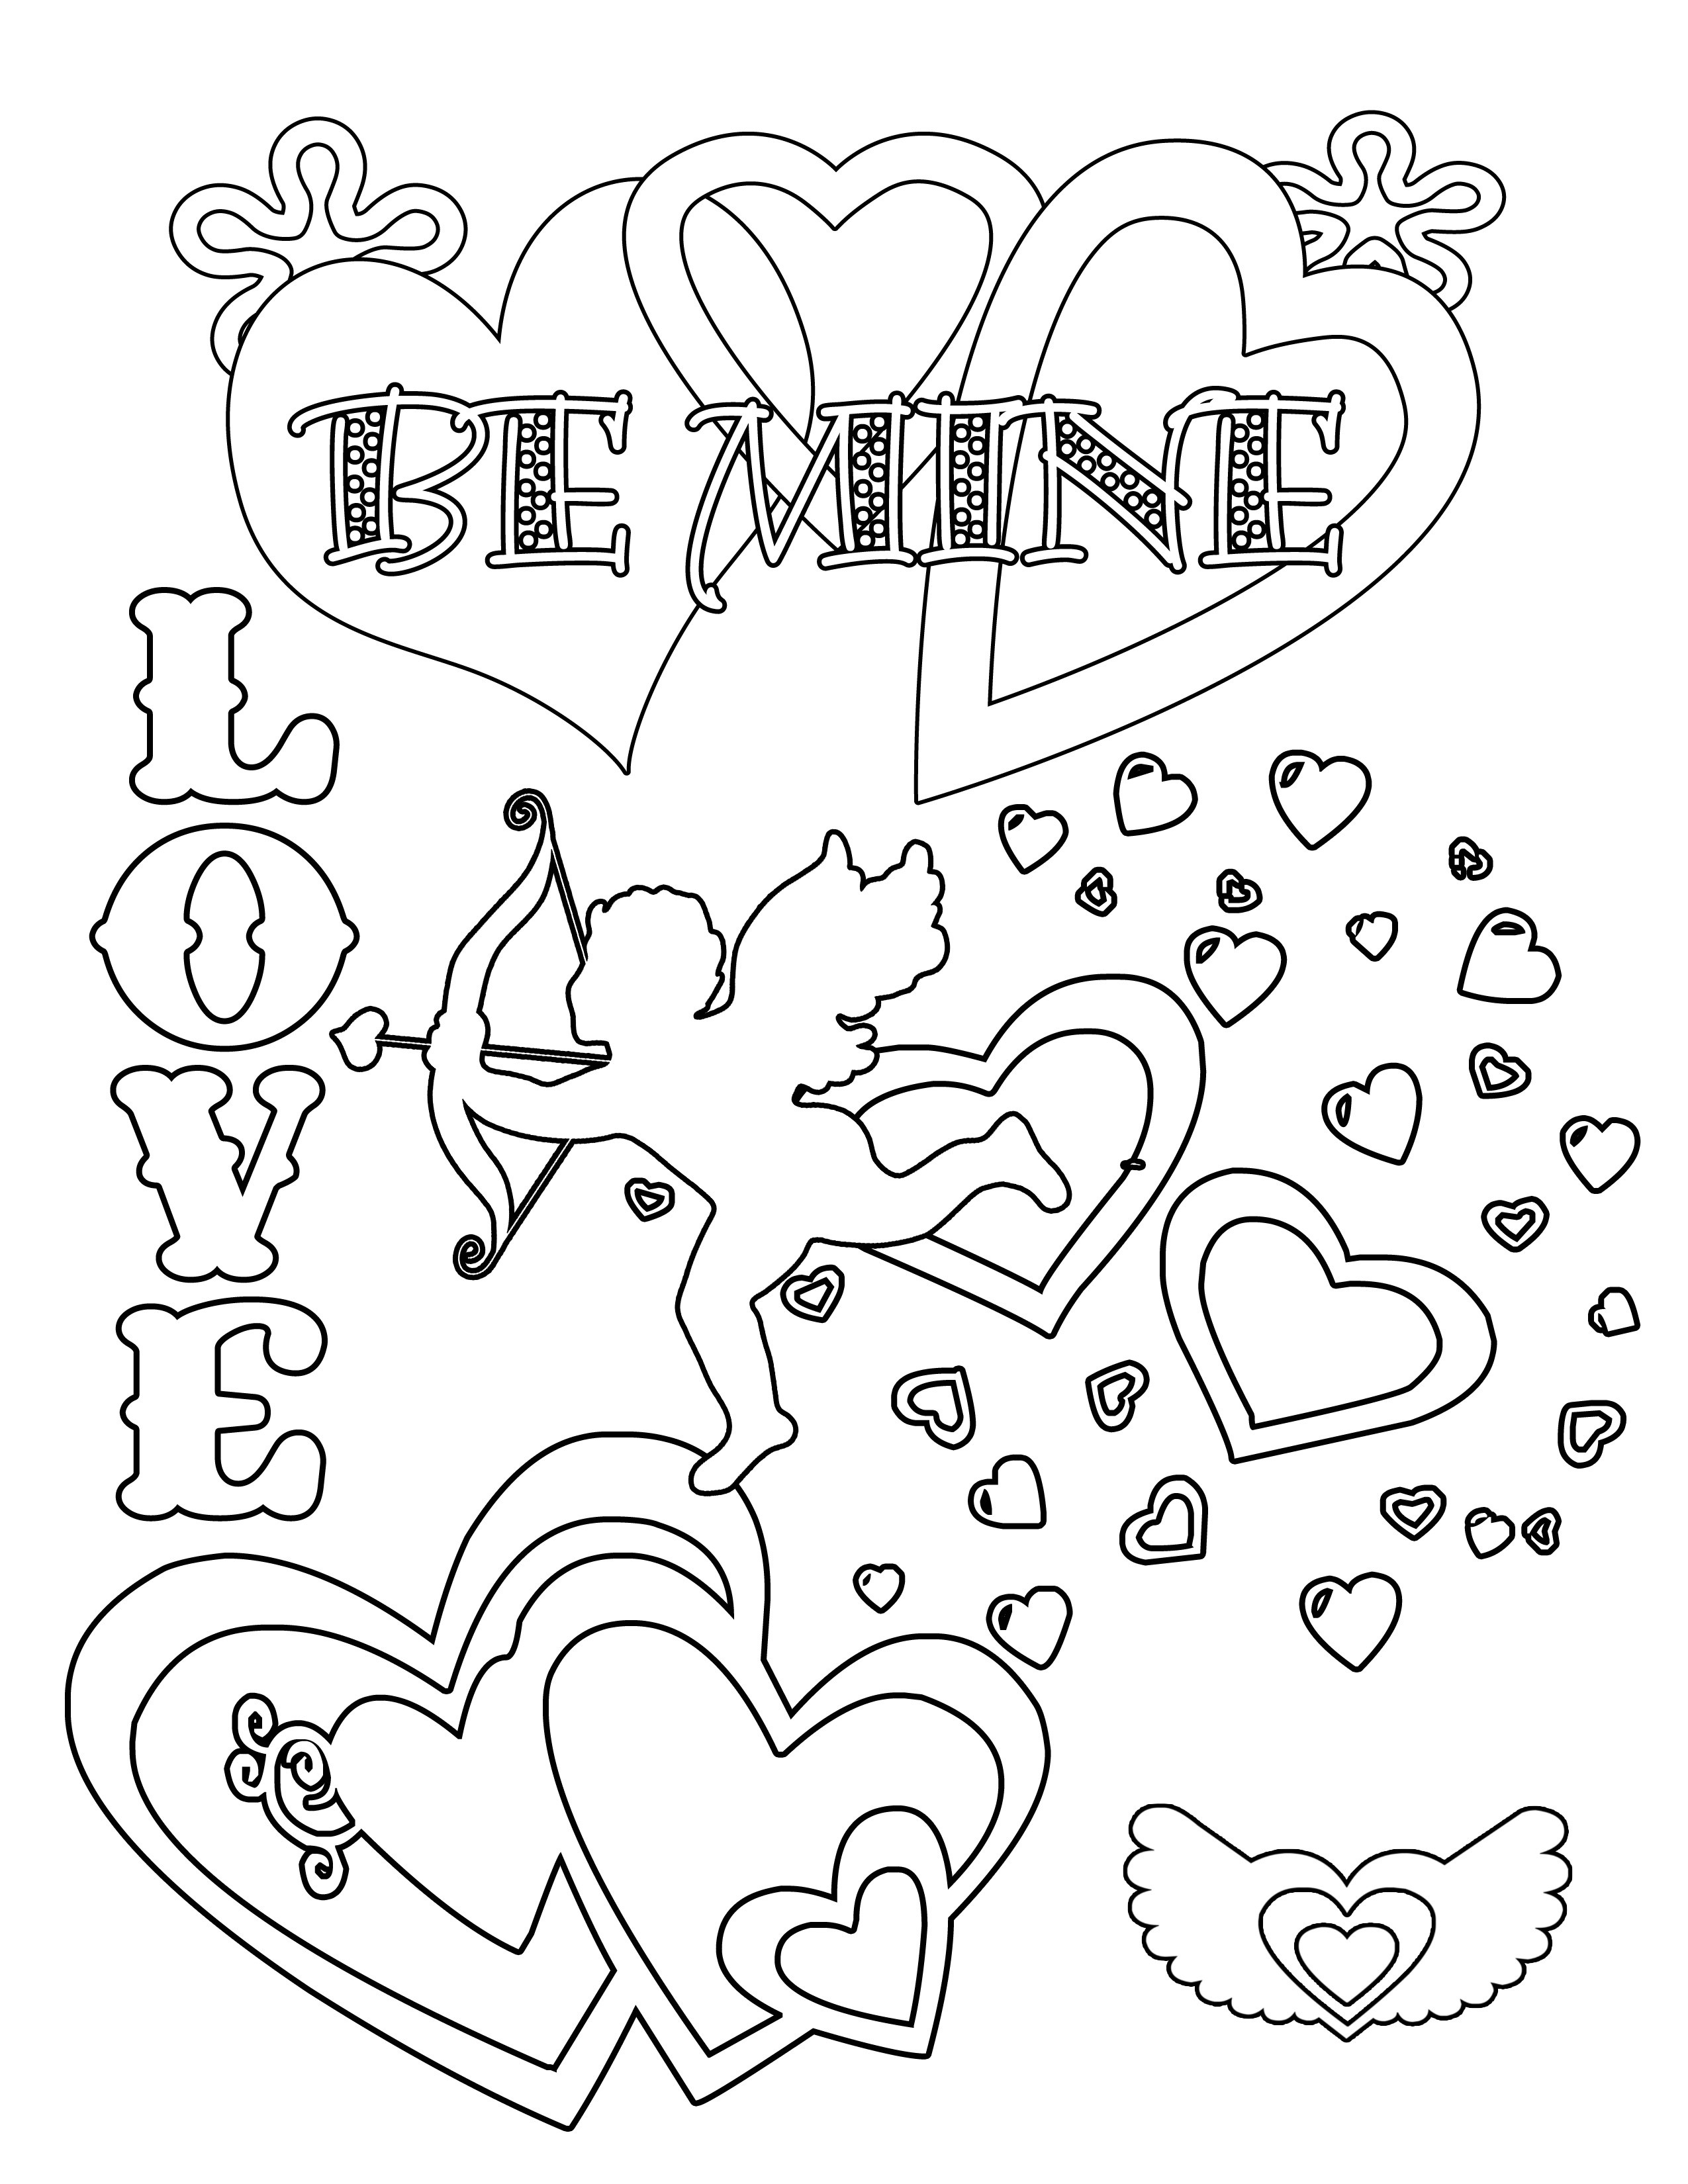 Party Simplicity Free Valentines Day Coloring Pages And Printables - Free Valentine Printables Coloring